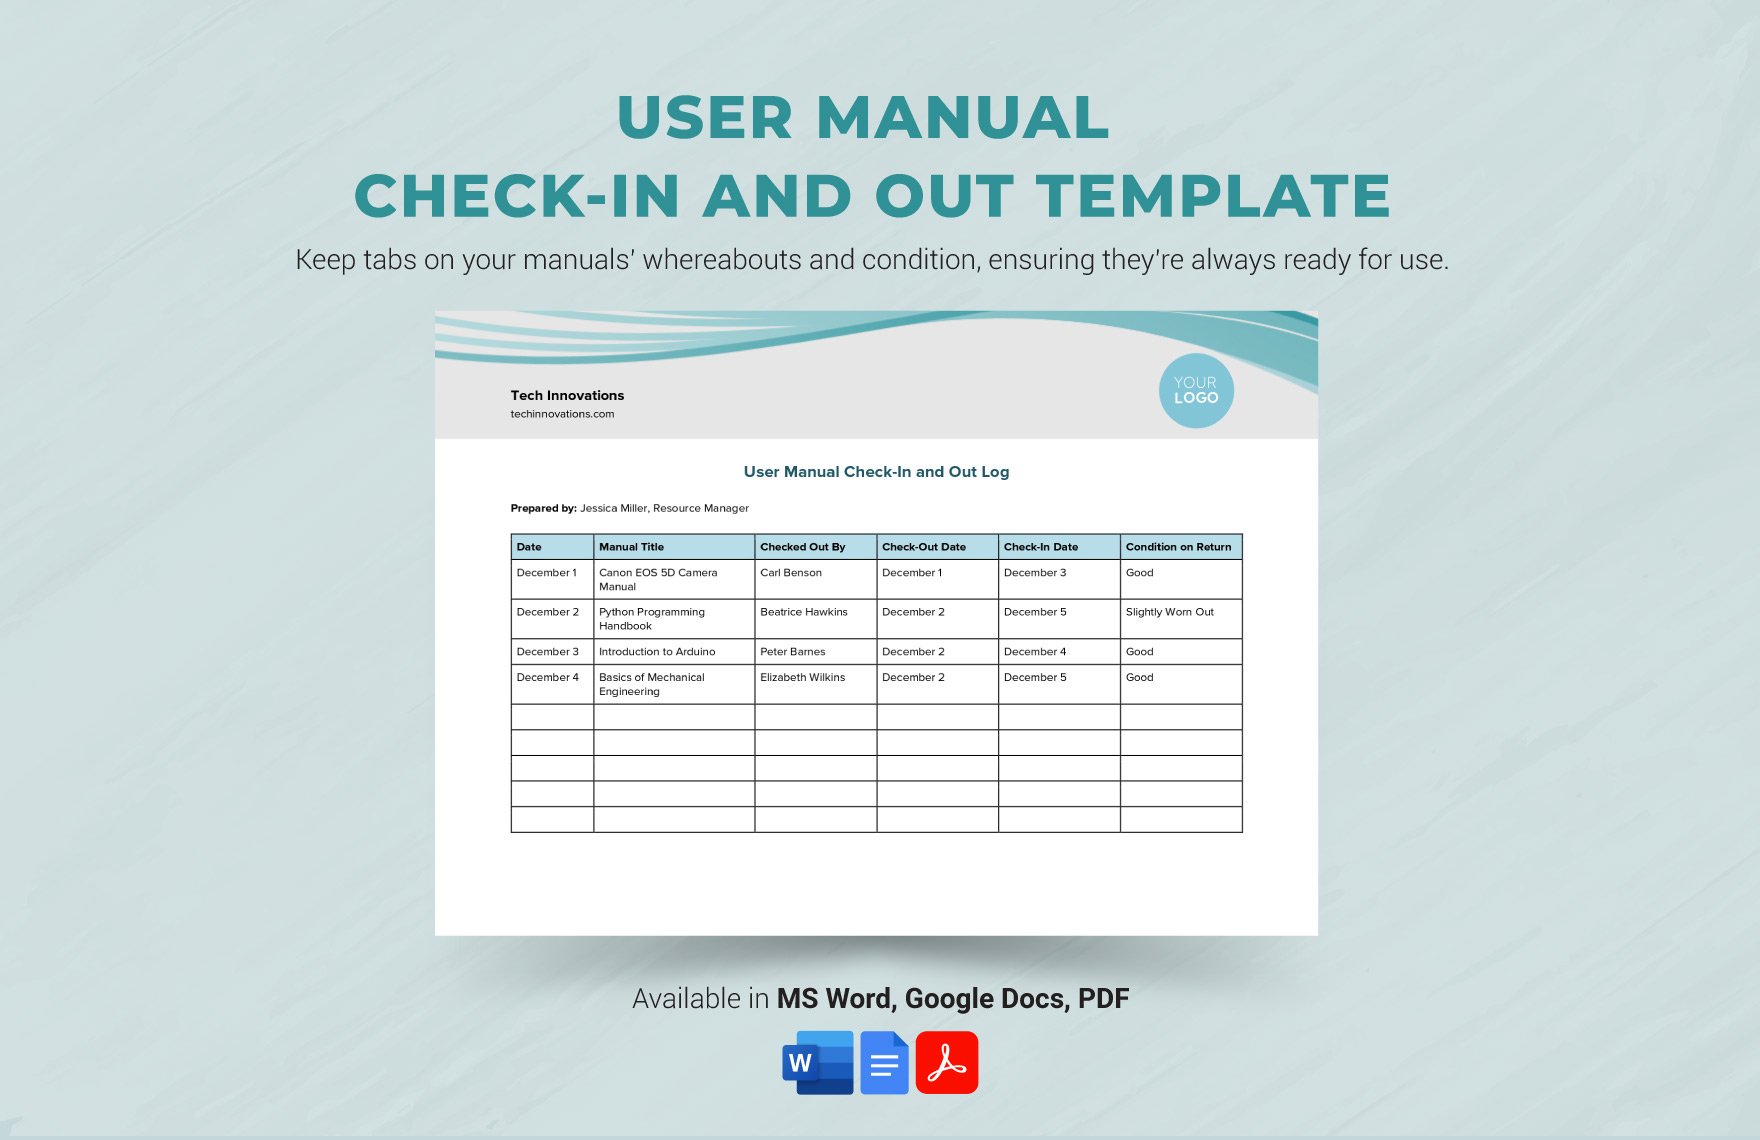 User Manual Check-in and Out Template